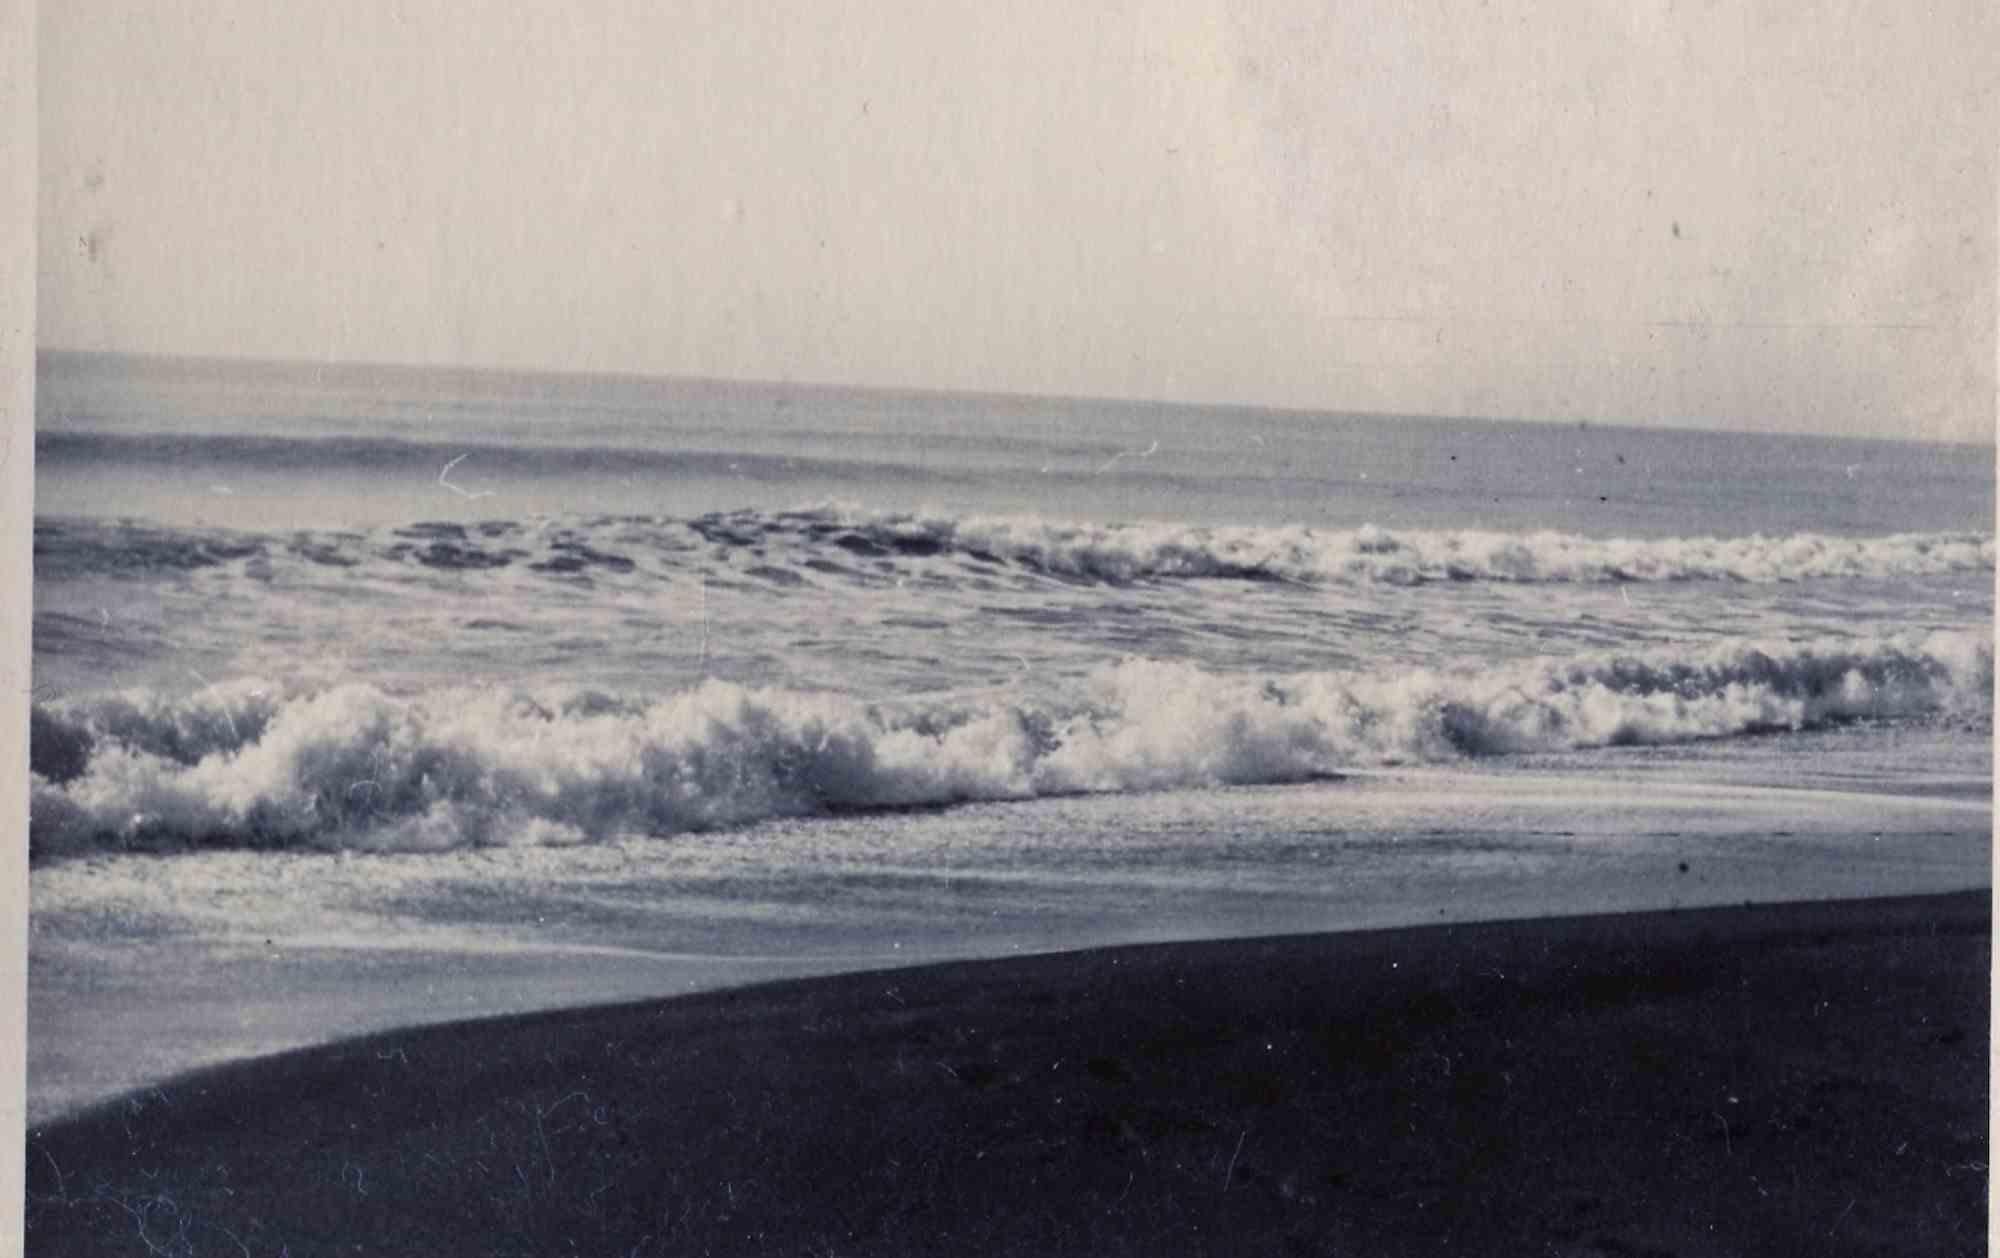 Unknown Figurative Photograph - Old days Photo -The Sea - Vintage Photo - Mid-20th Century